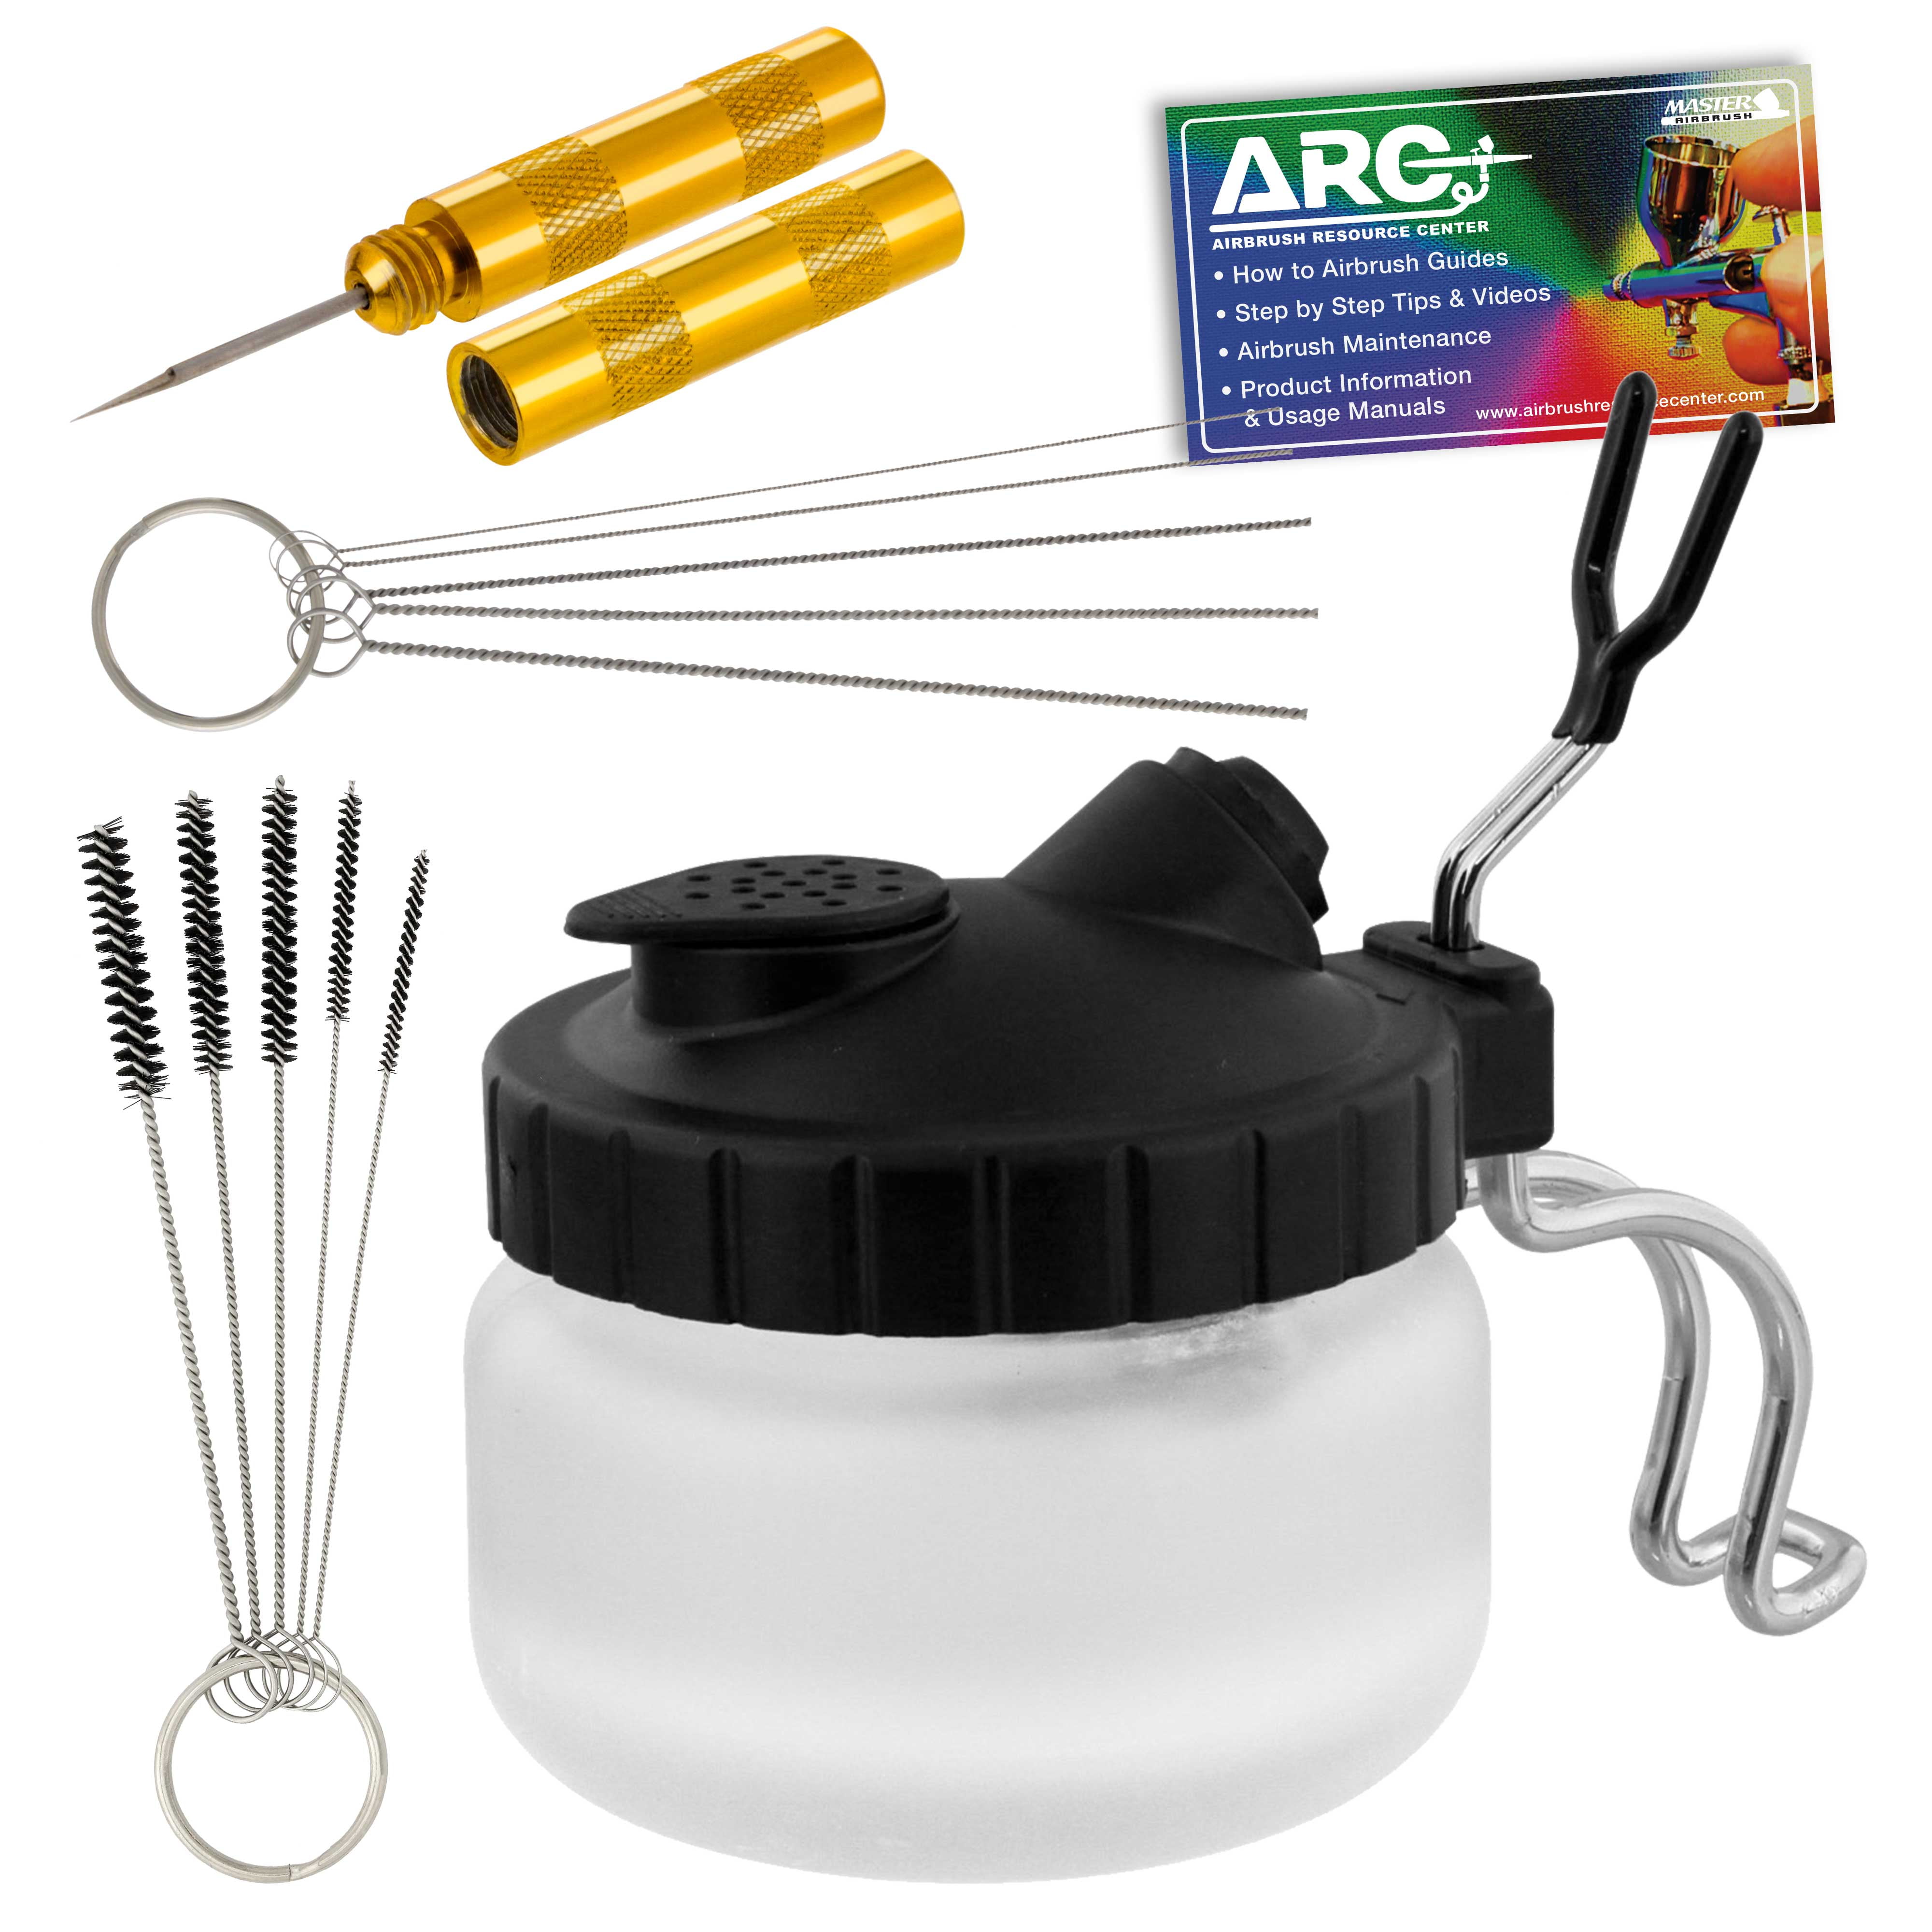 Master Airbrush 12 Piece Airbrush Cleaning Kit - 5 PC Cleaning Needles, 5 PC Cleaning Brushes, 1 Wash Needle, How to Book